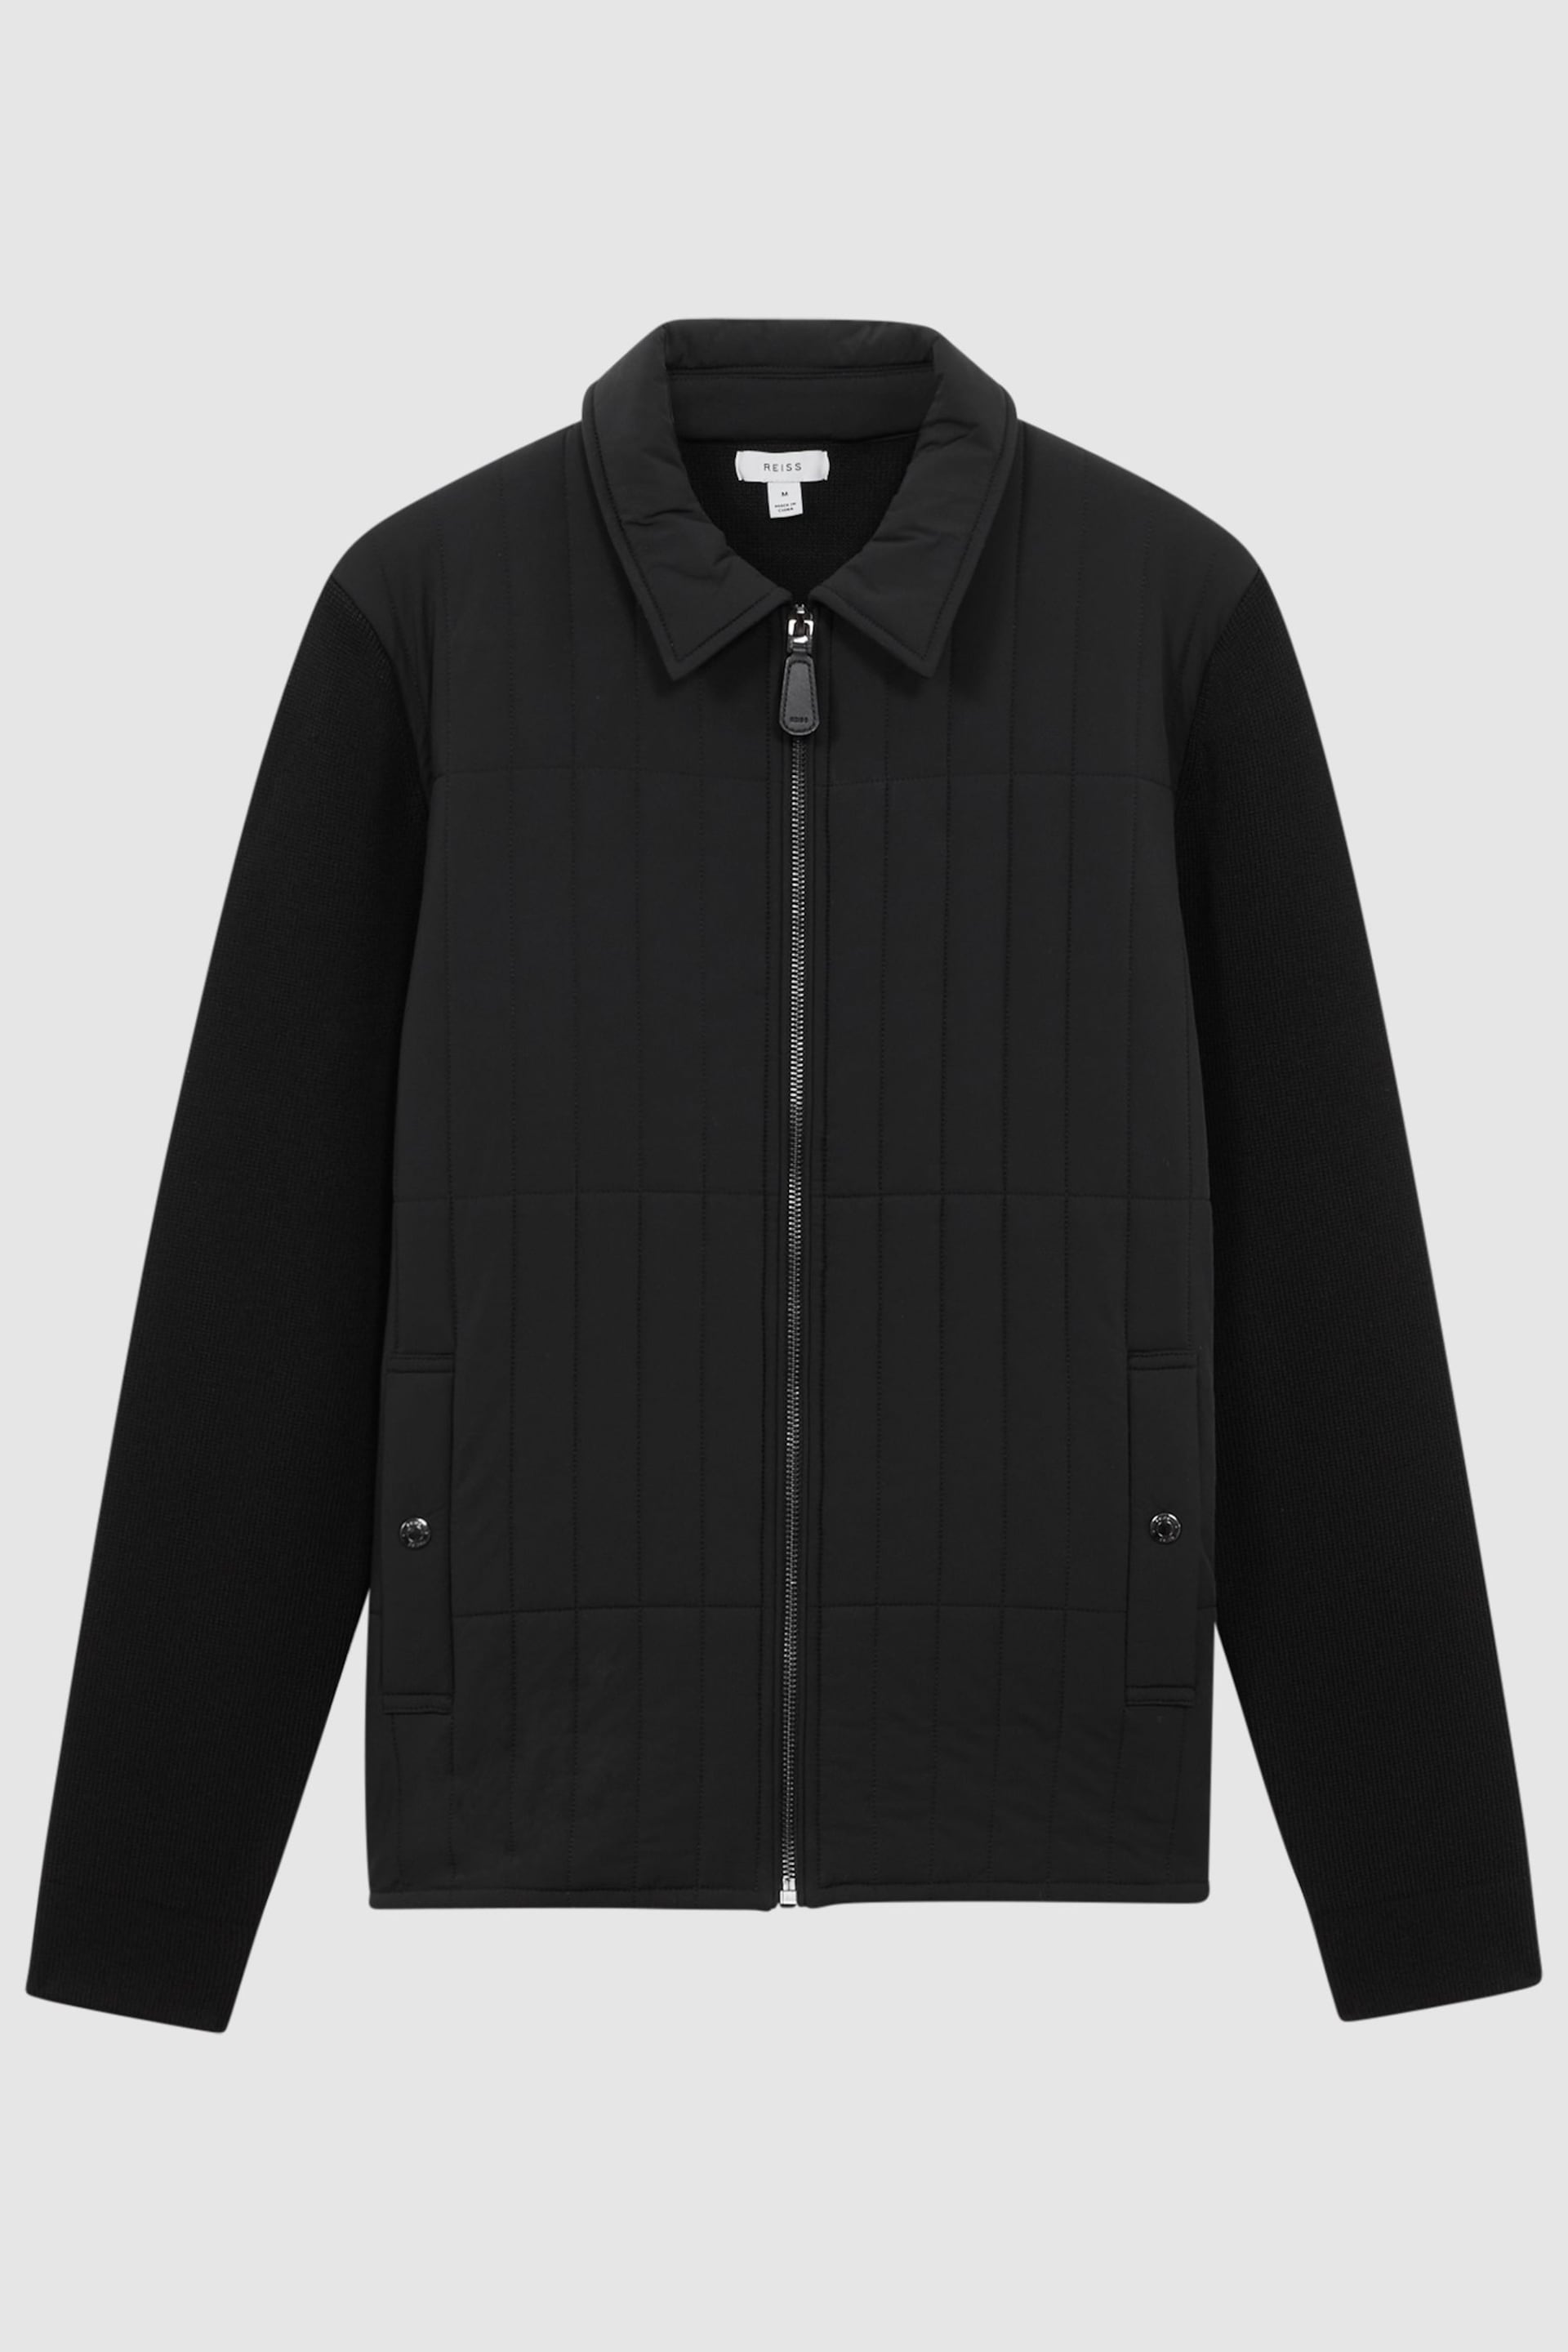 Reiss Black Tosca Hybrid Knit and Quilt Jacket - Image 2 of 5